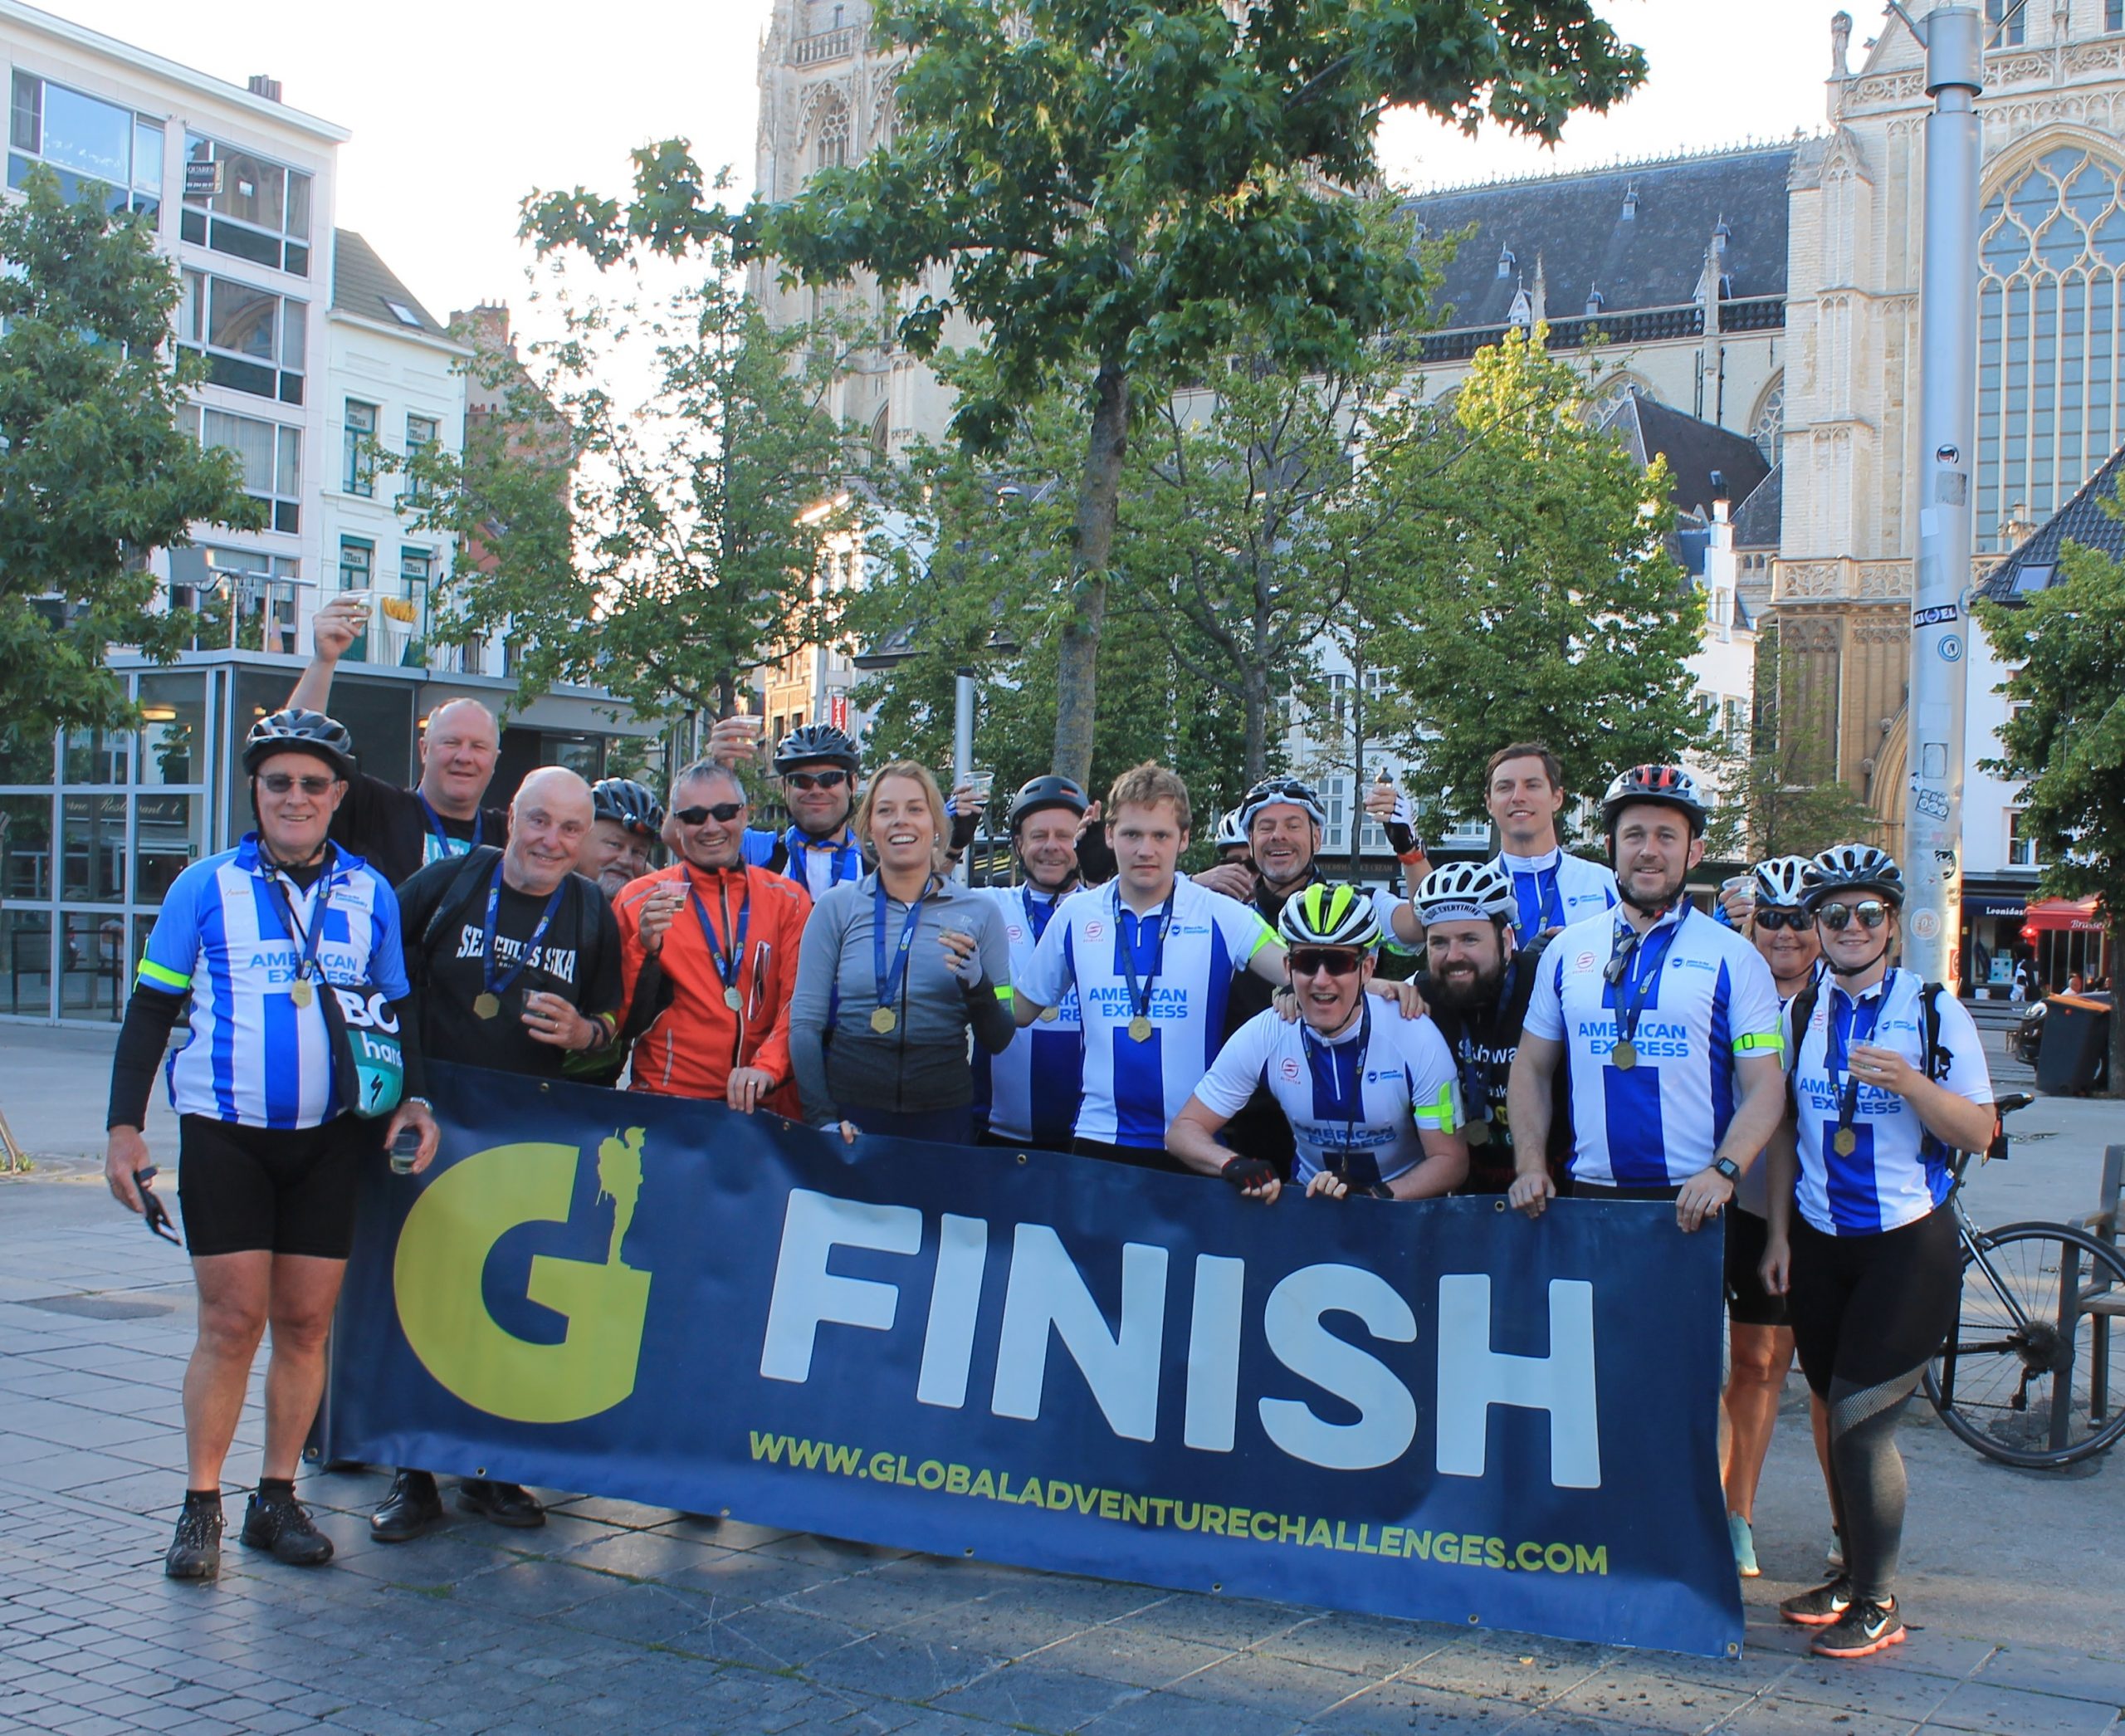 European cycle challenge raises £23,000 for Albion in the Community